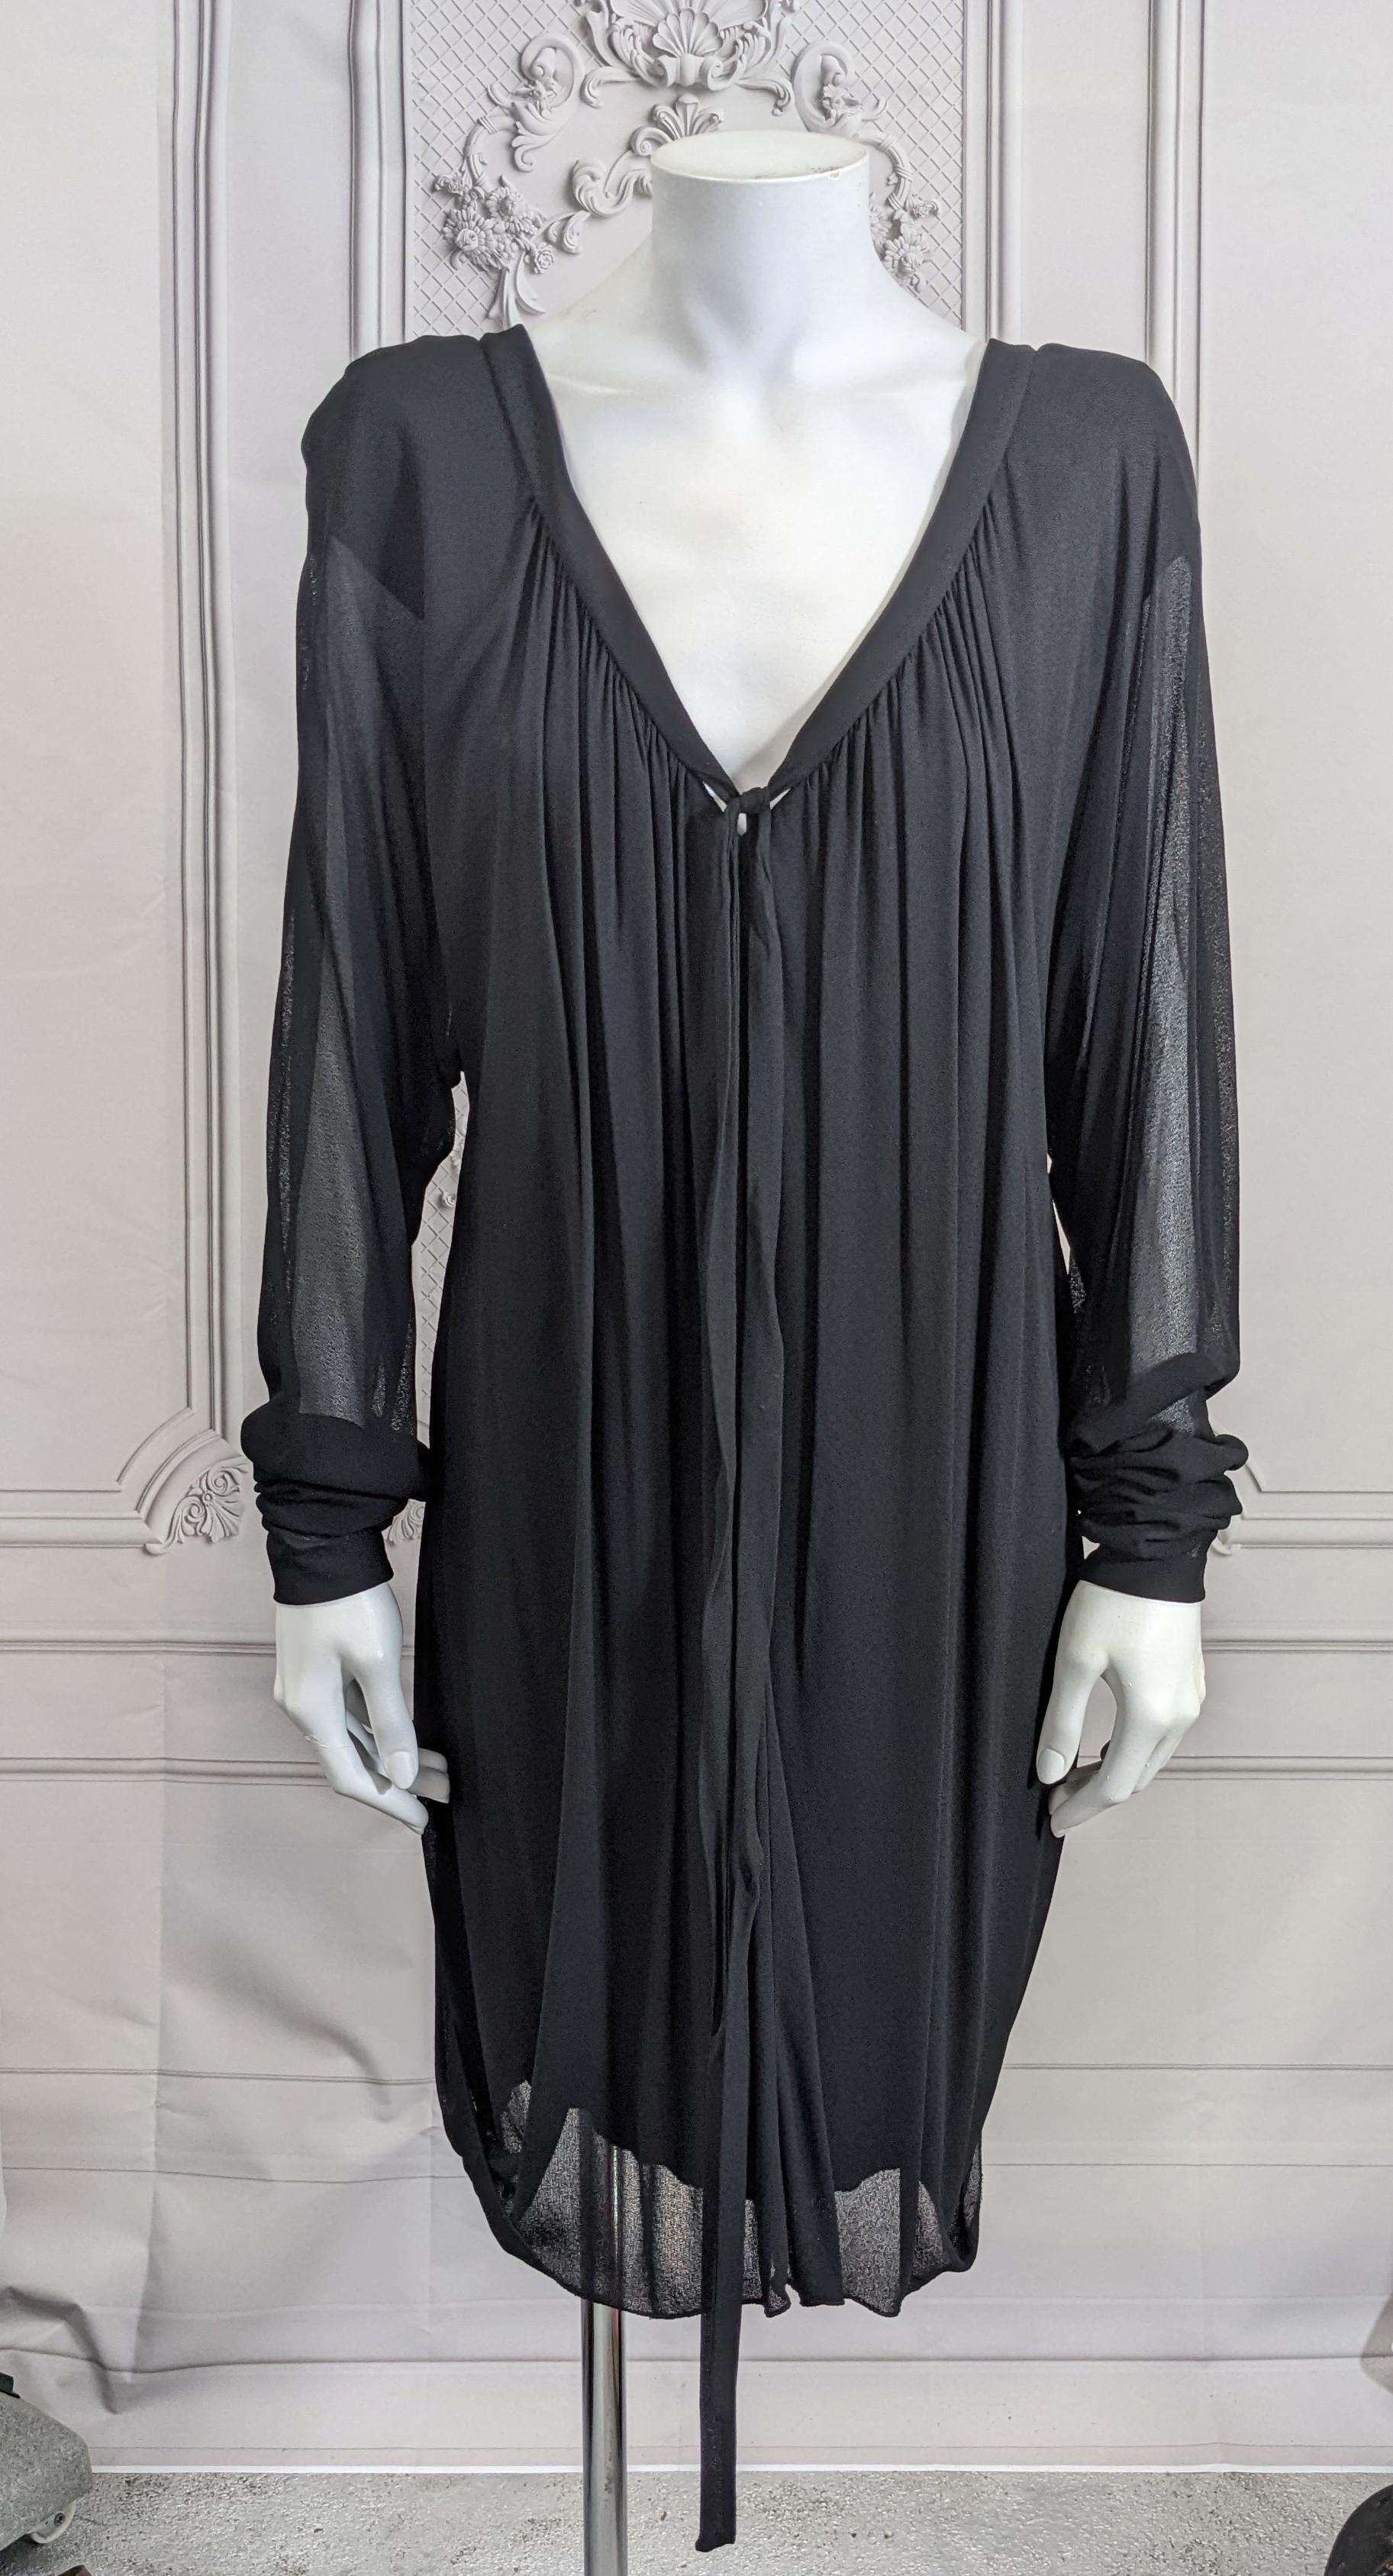 Holly Harp's Innovative Black Jersey Draped Mini from the late 1970's. Semi sheer jersey is gathered up into the back neckline from a balloon hem. Deep V neckline with long ties in front. There is a cap sleeved liner of rayon jersey within so only